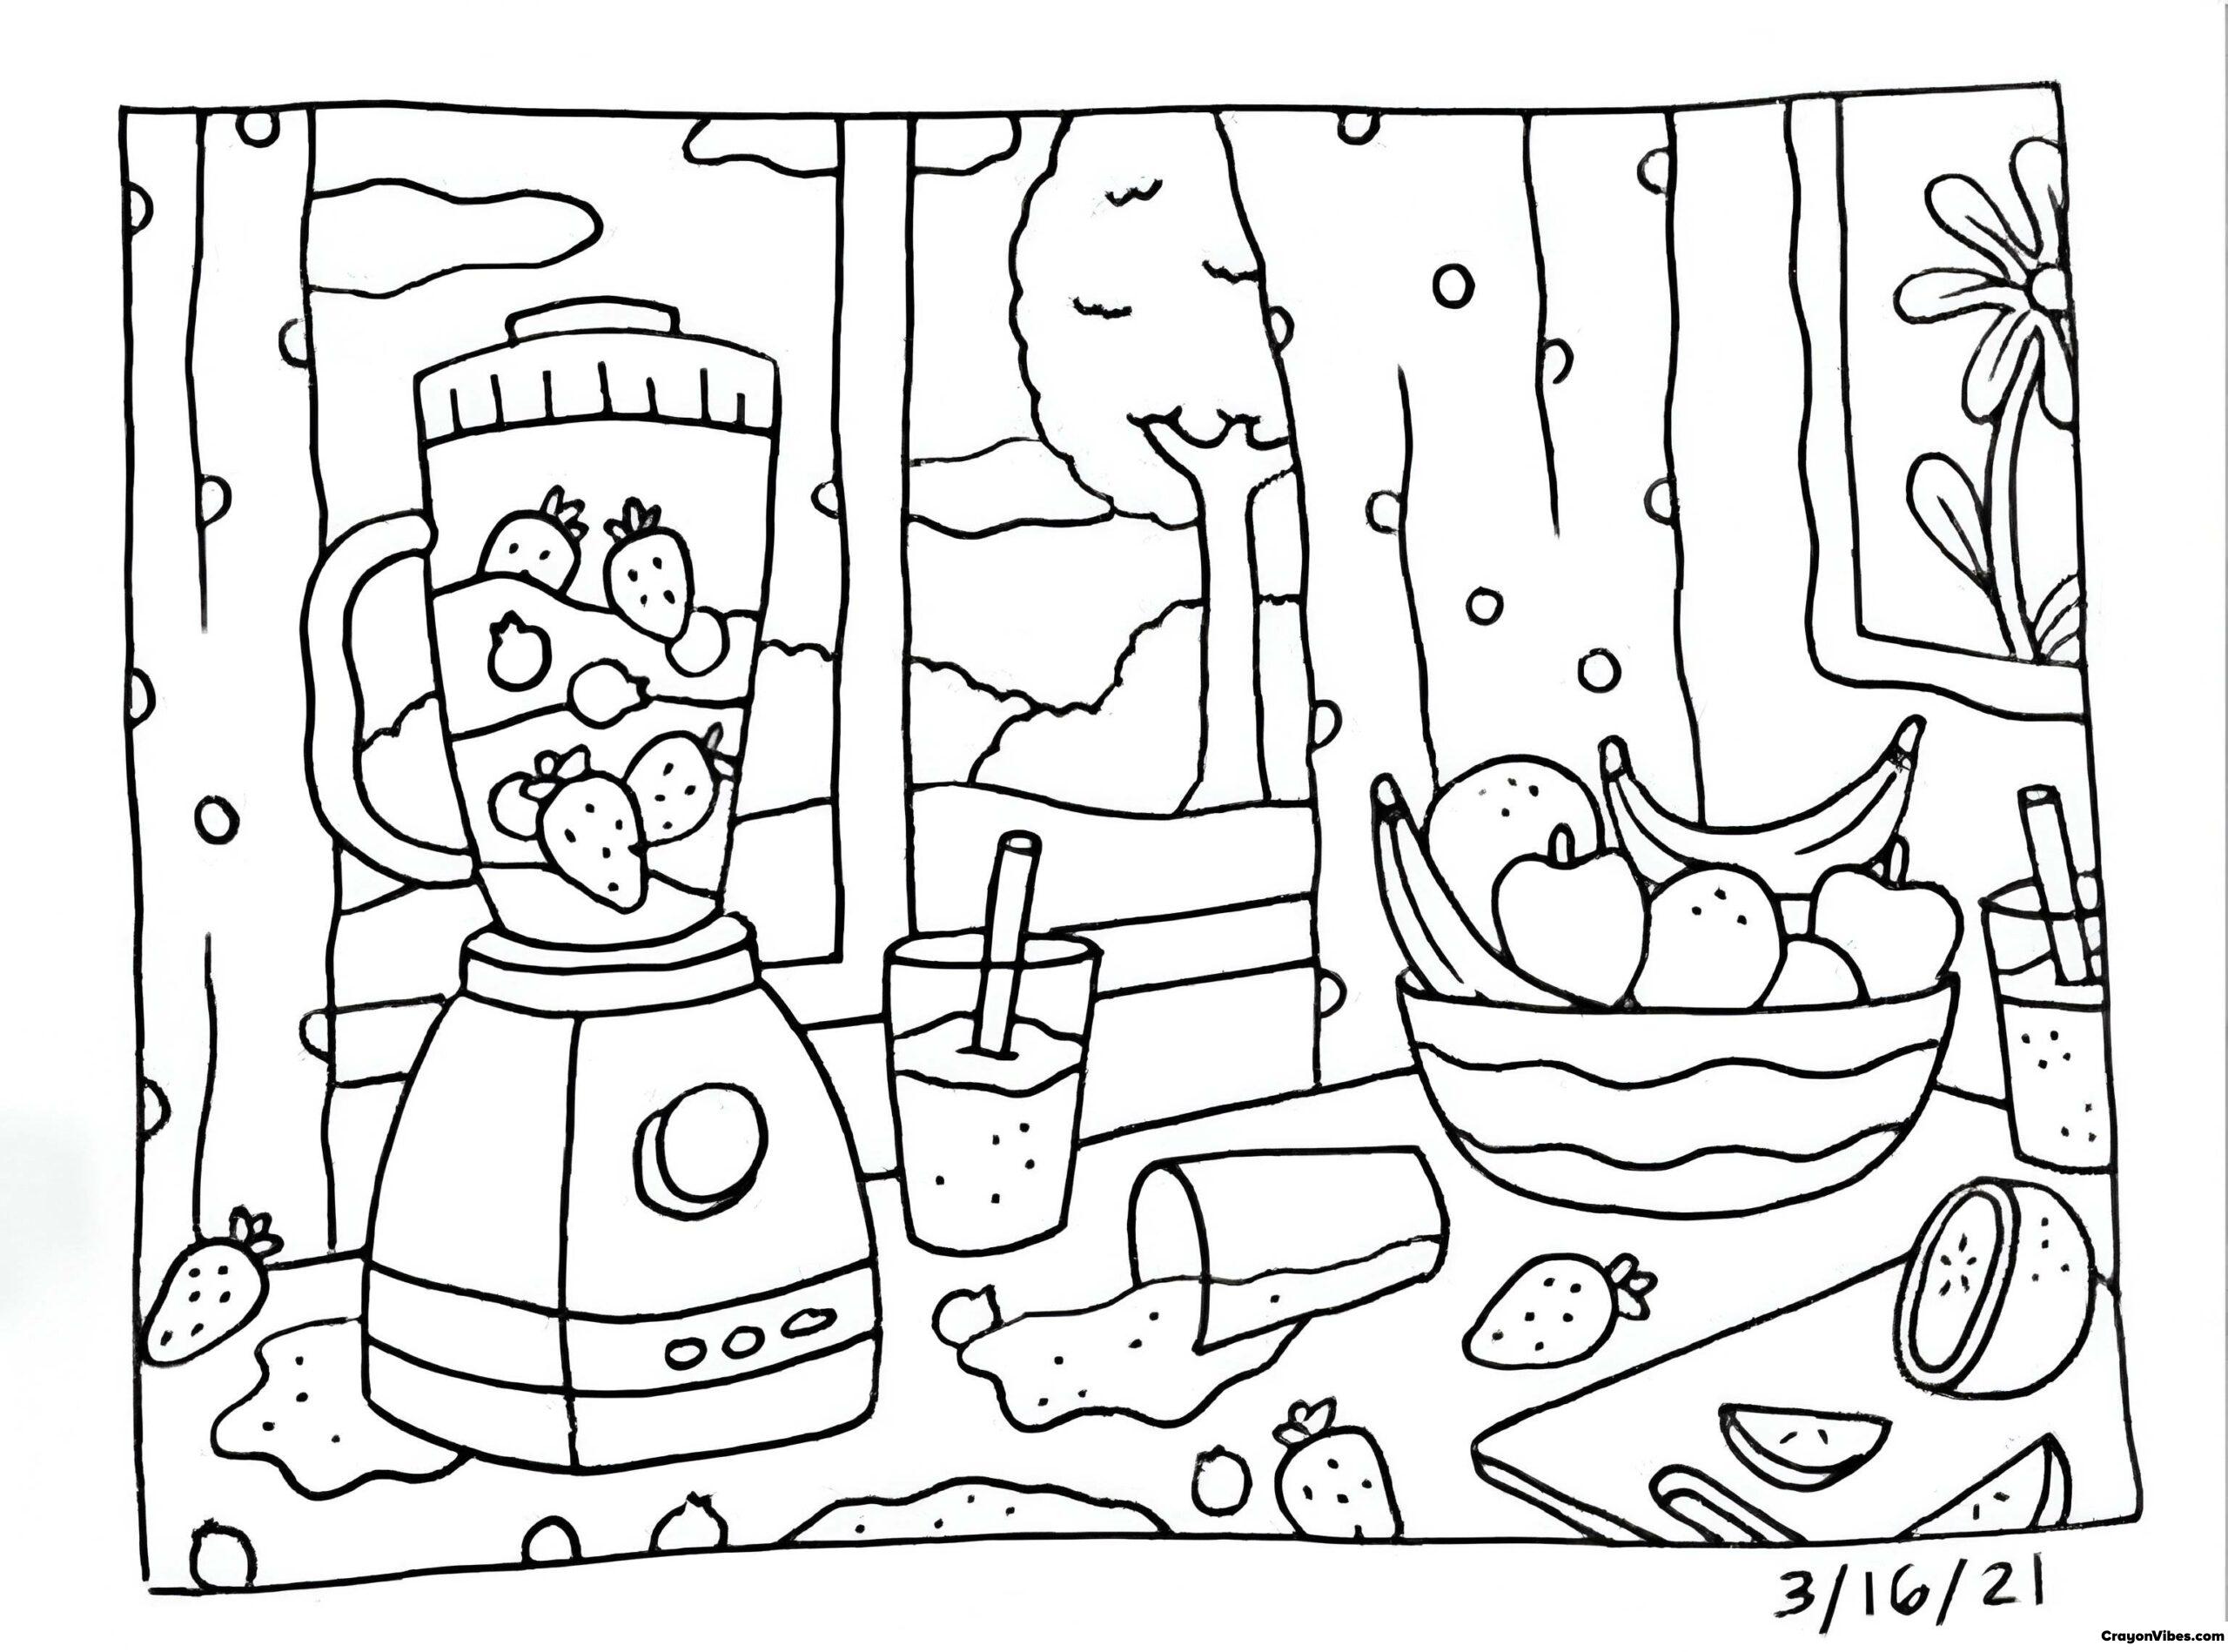 Bobbie Goods Coloring Pages: A Creative and Engaging Activity for